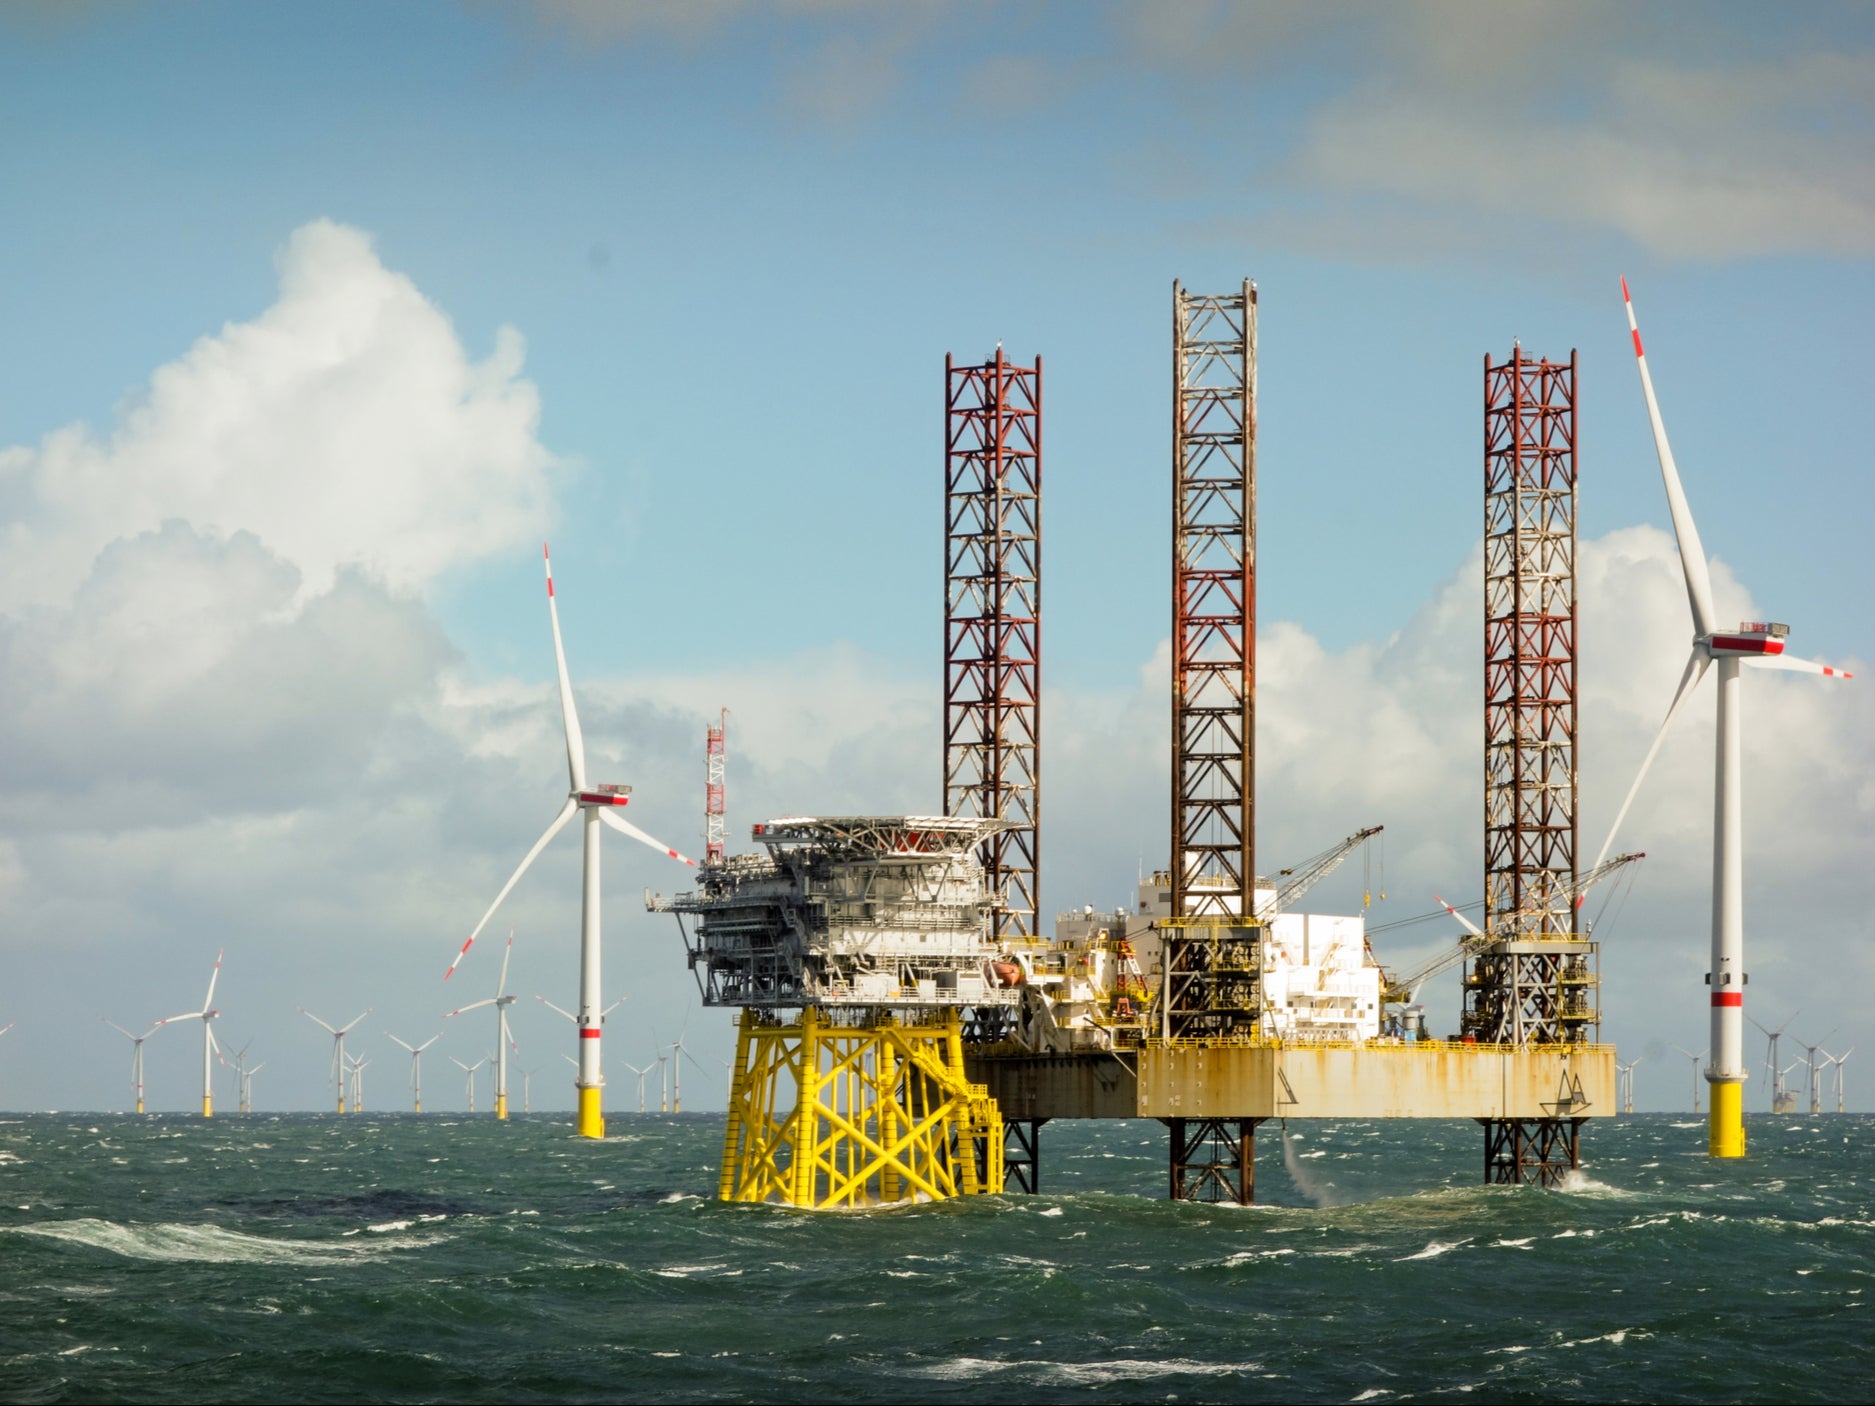 A wind farm in the North Sea. Government support for new oil and gas in the area could raise costs and delay offshore wind expansion